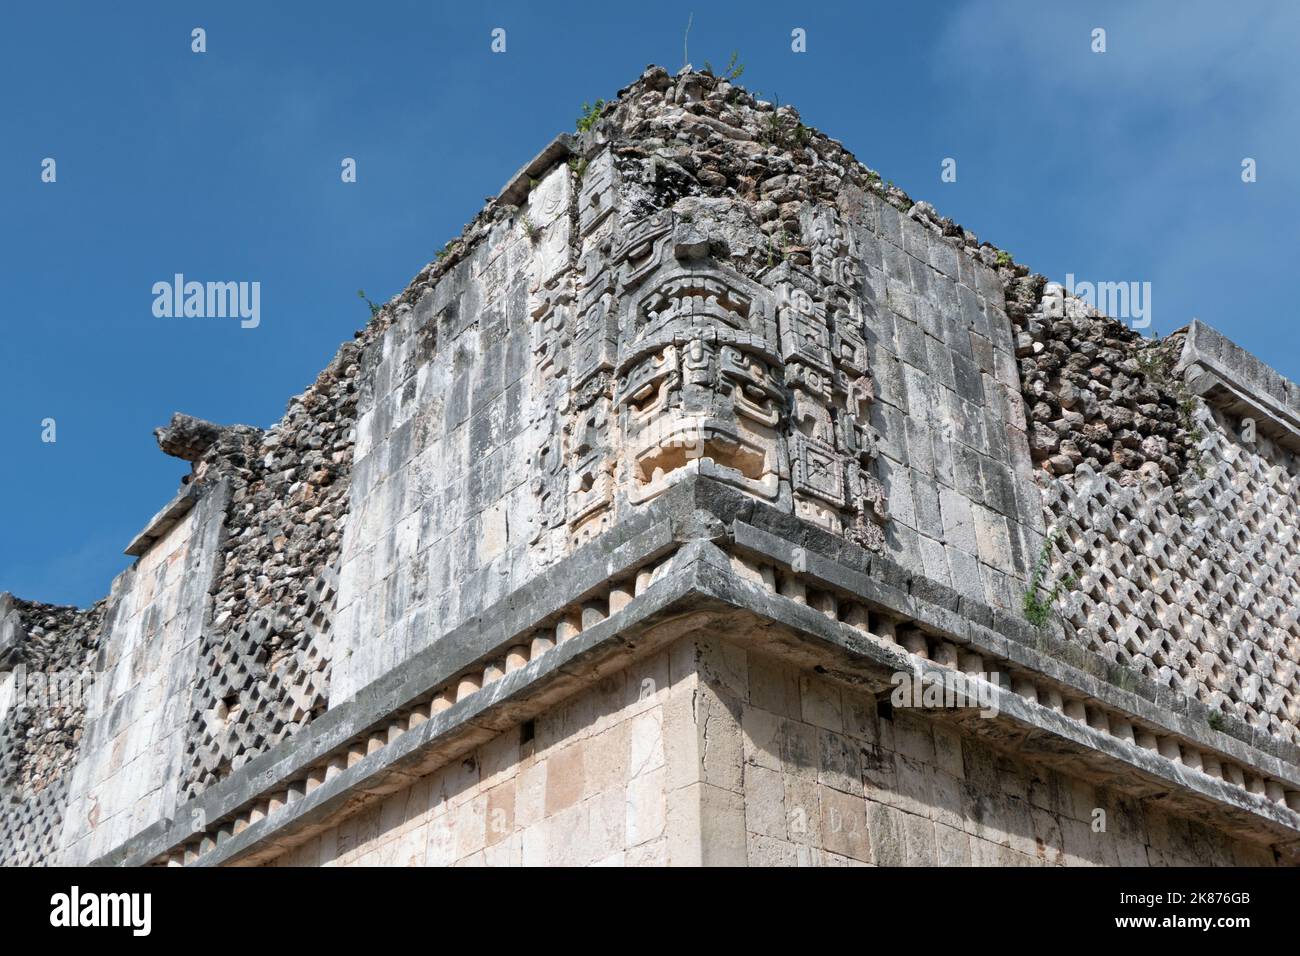 View of the Maya archeological site of Uxmal in Yucatan, Mexico. Mayan ruins with Nunnery Quadrangle as ancient building for tourism and travel. Detai Stock Photo